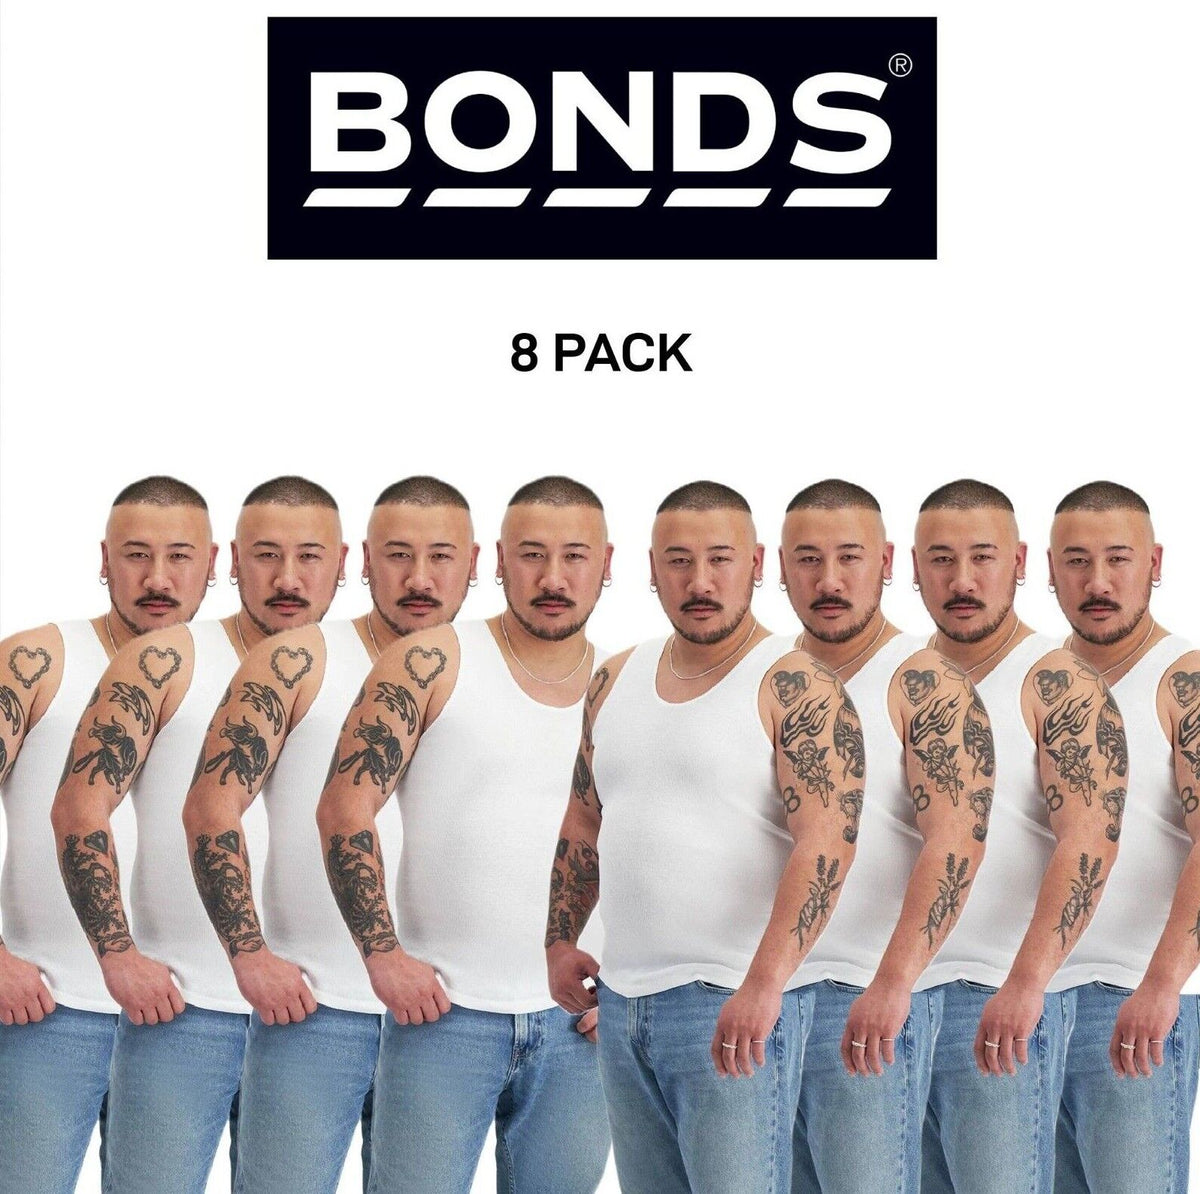 Bonds Mens Chesty Singlets Breathable Comfortable Side Seamfree 8 Pack M7WL